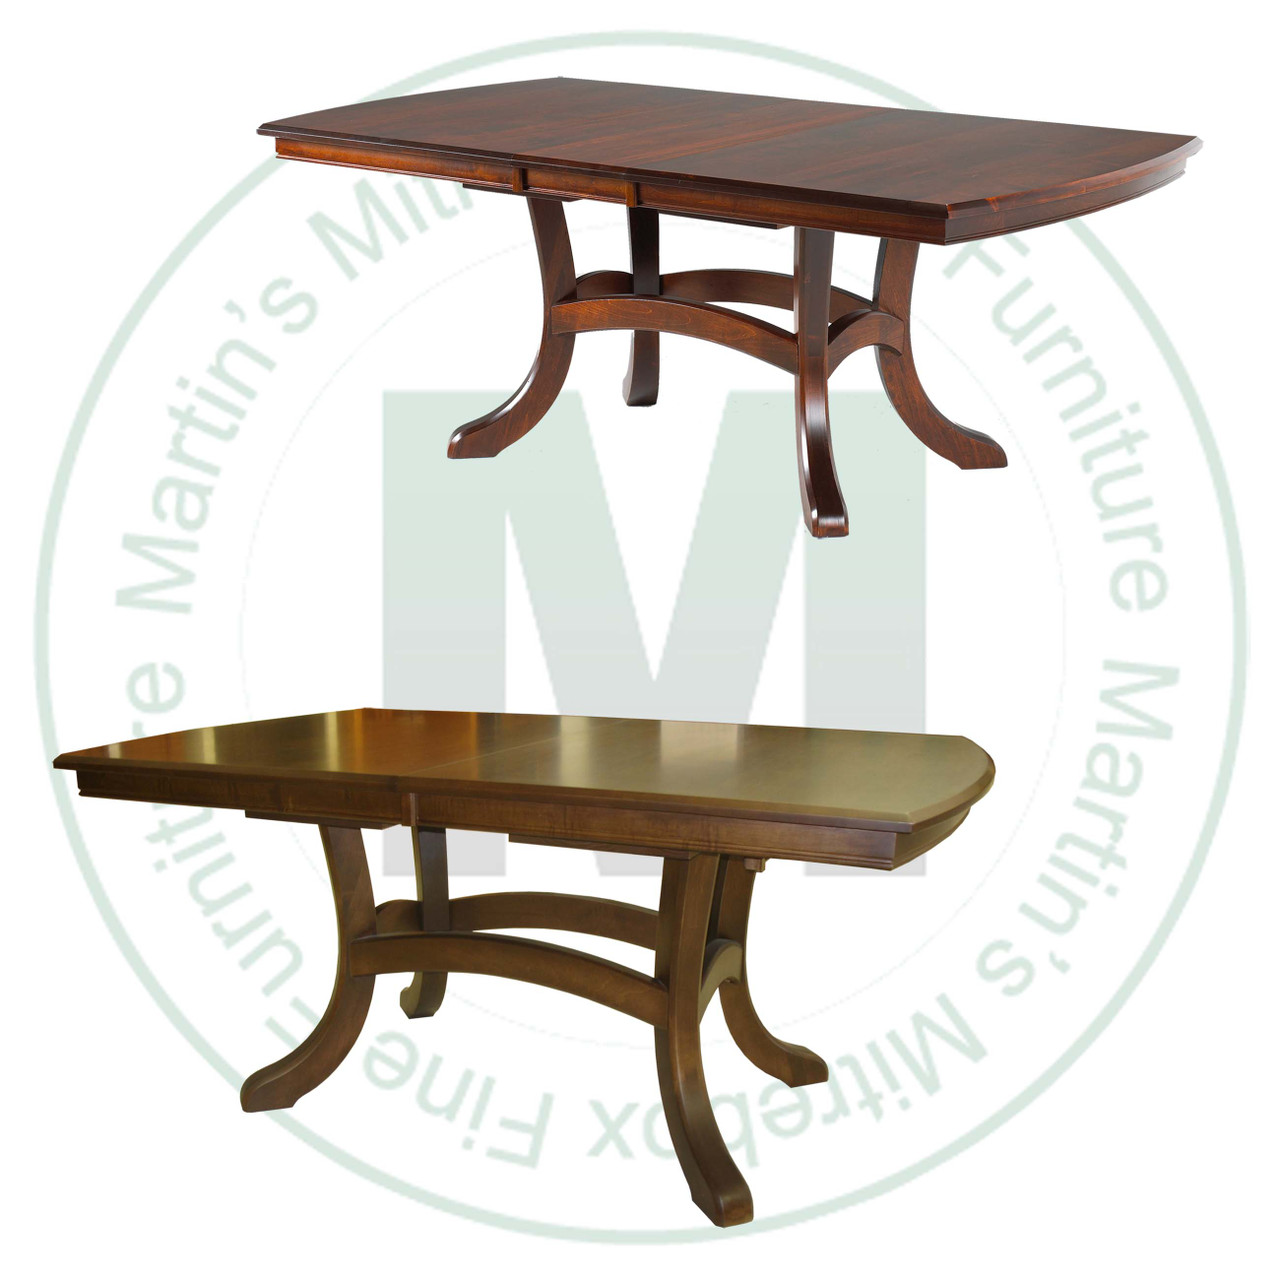 Maple Jordan Double Pedestal Table 42''D x 72''W x 30''H With 4 - 12'' Leaves. Table Has 1.25'' Thick Top